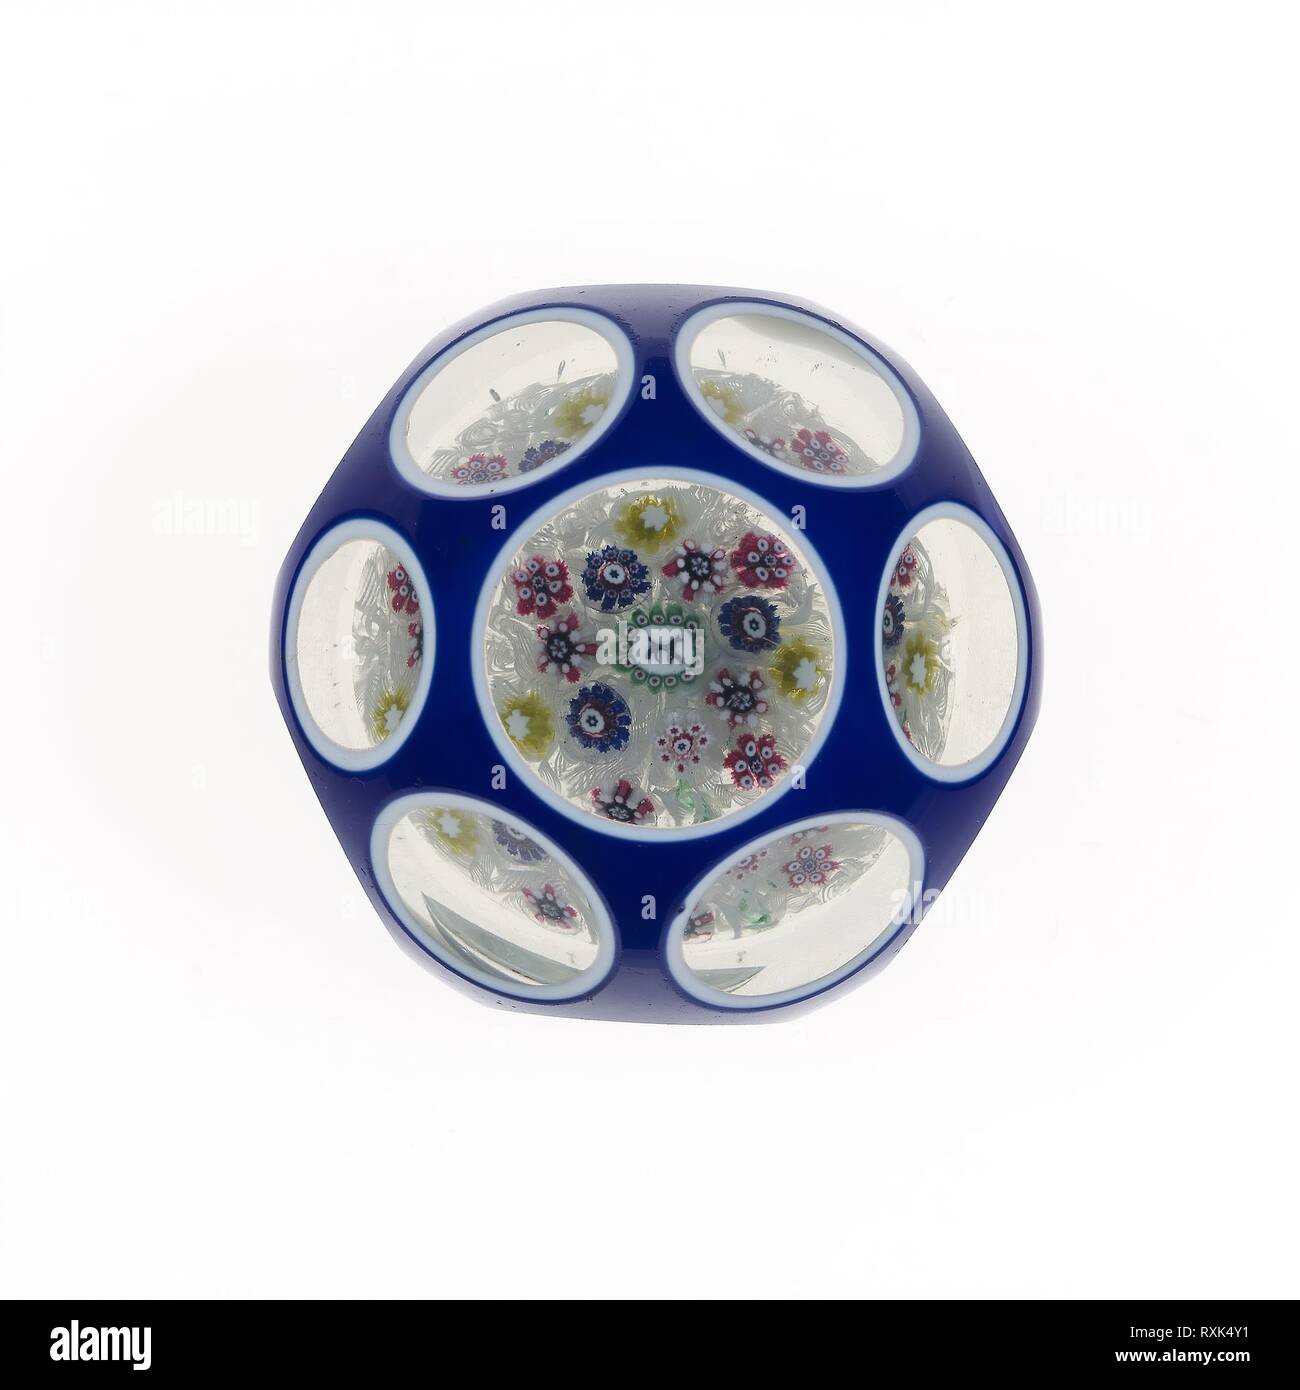 Paperweight. Saint-Louis; France, founded 1767. Date: 1825-1850. Dimensions: Diam. 6.4 cm (2 1/2 in.). Glass. Origin: France. Museum: The Chicago Art Institute. Stock Photo